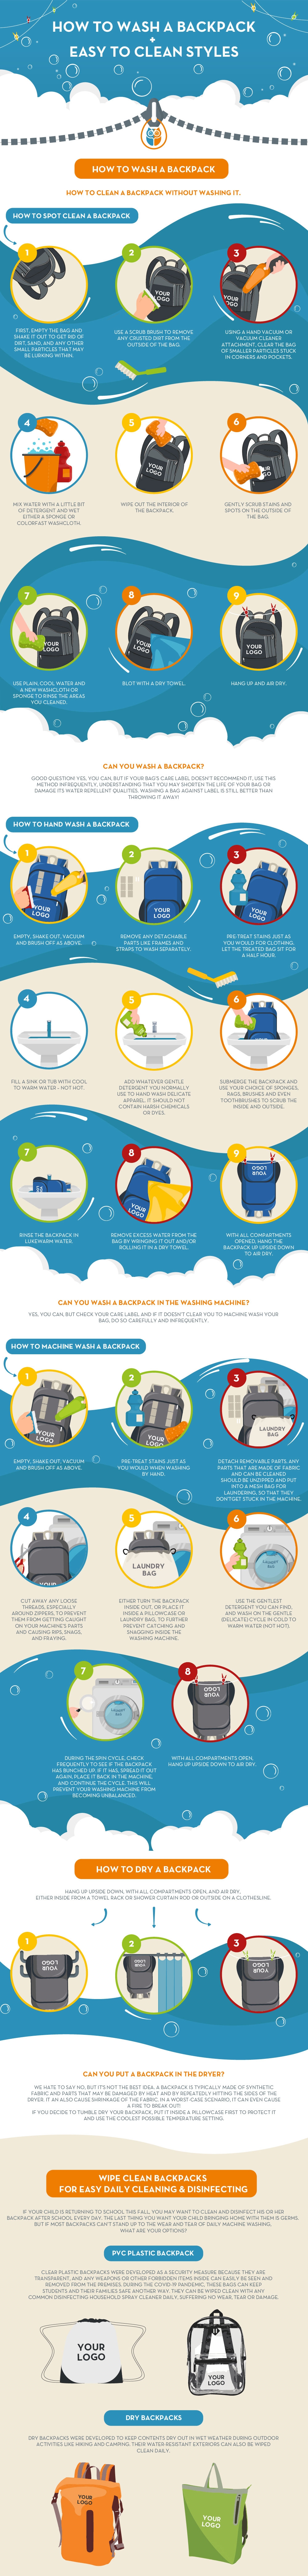 How to Wash a Backpack Infographic